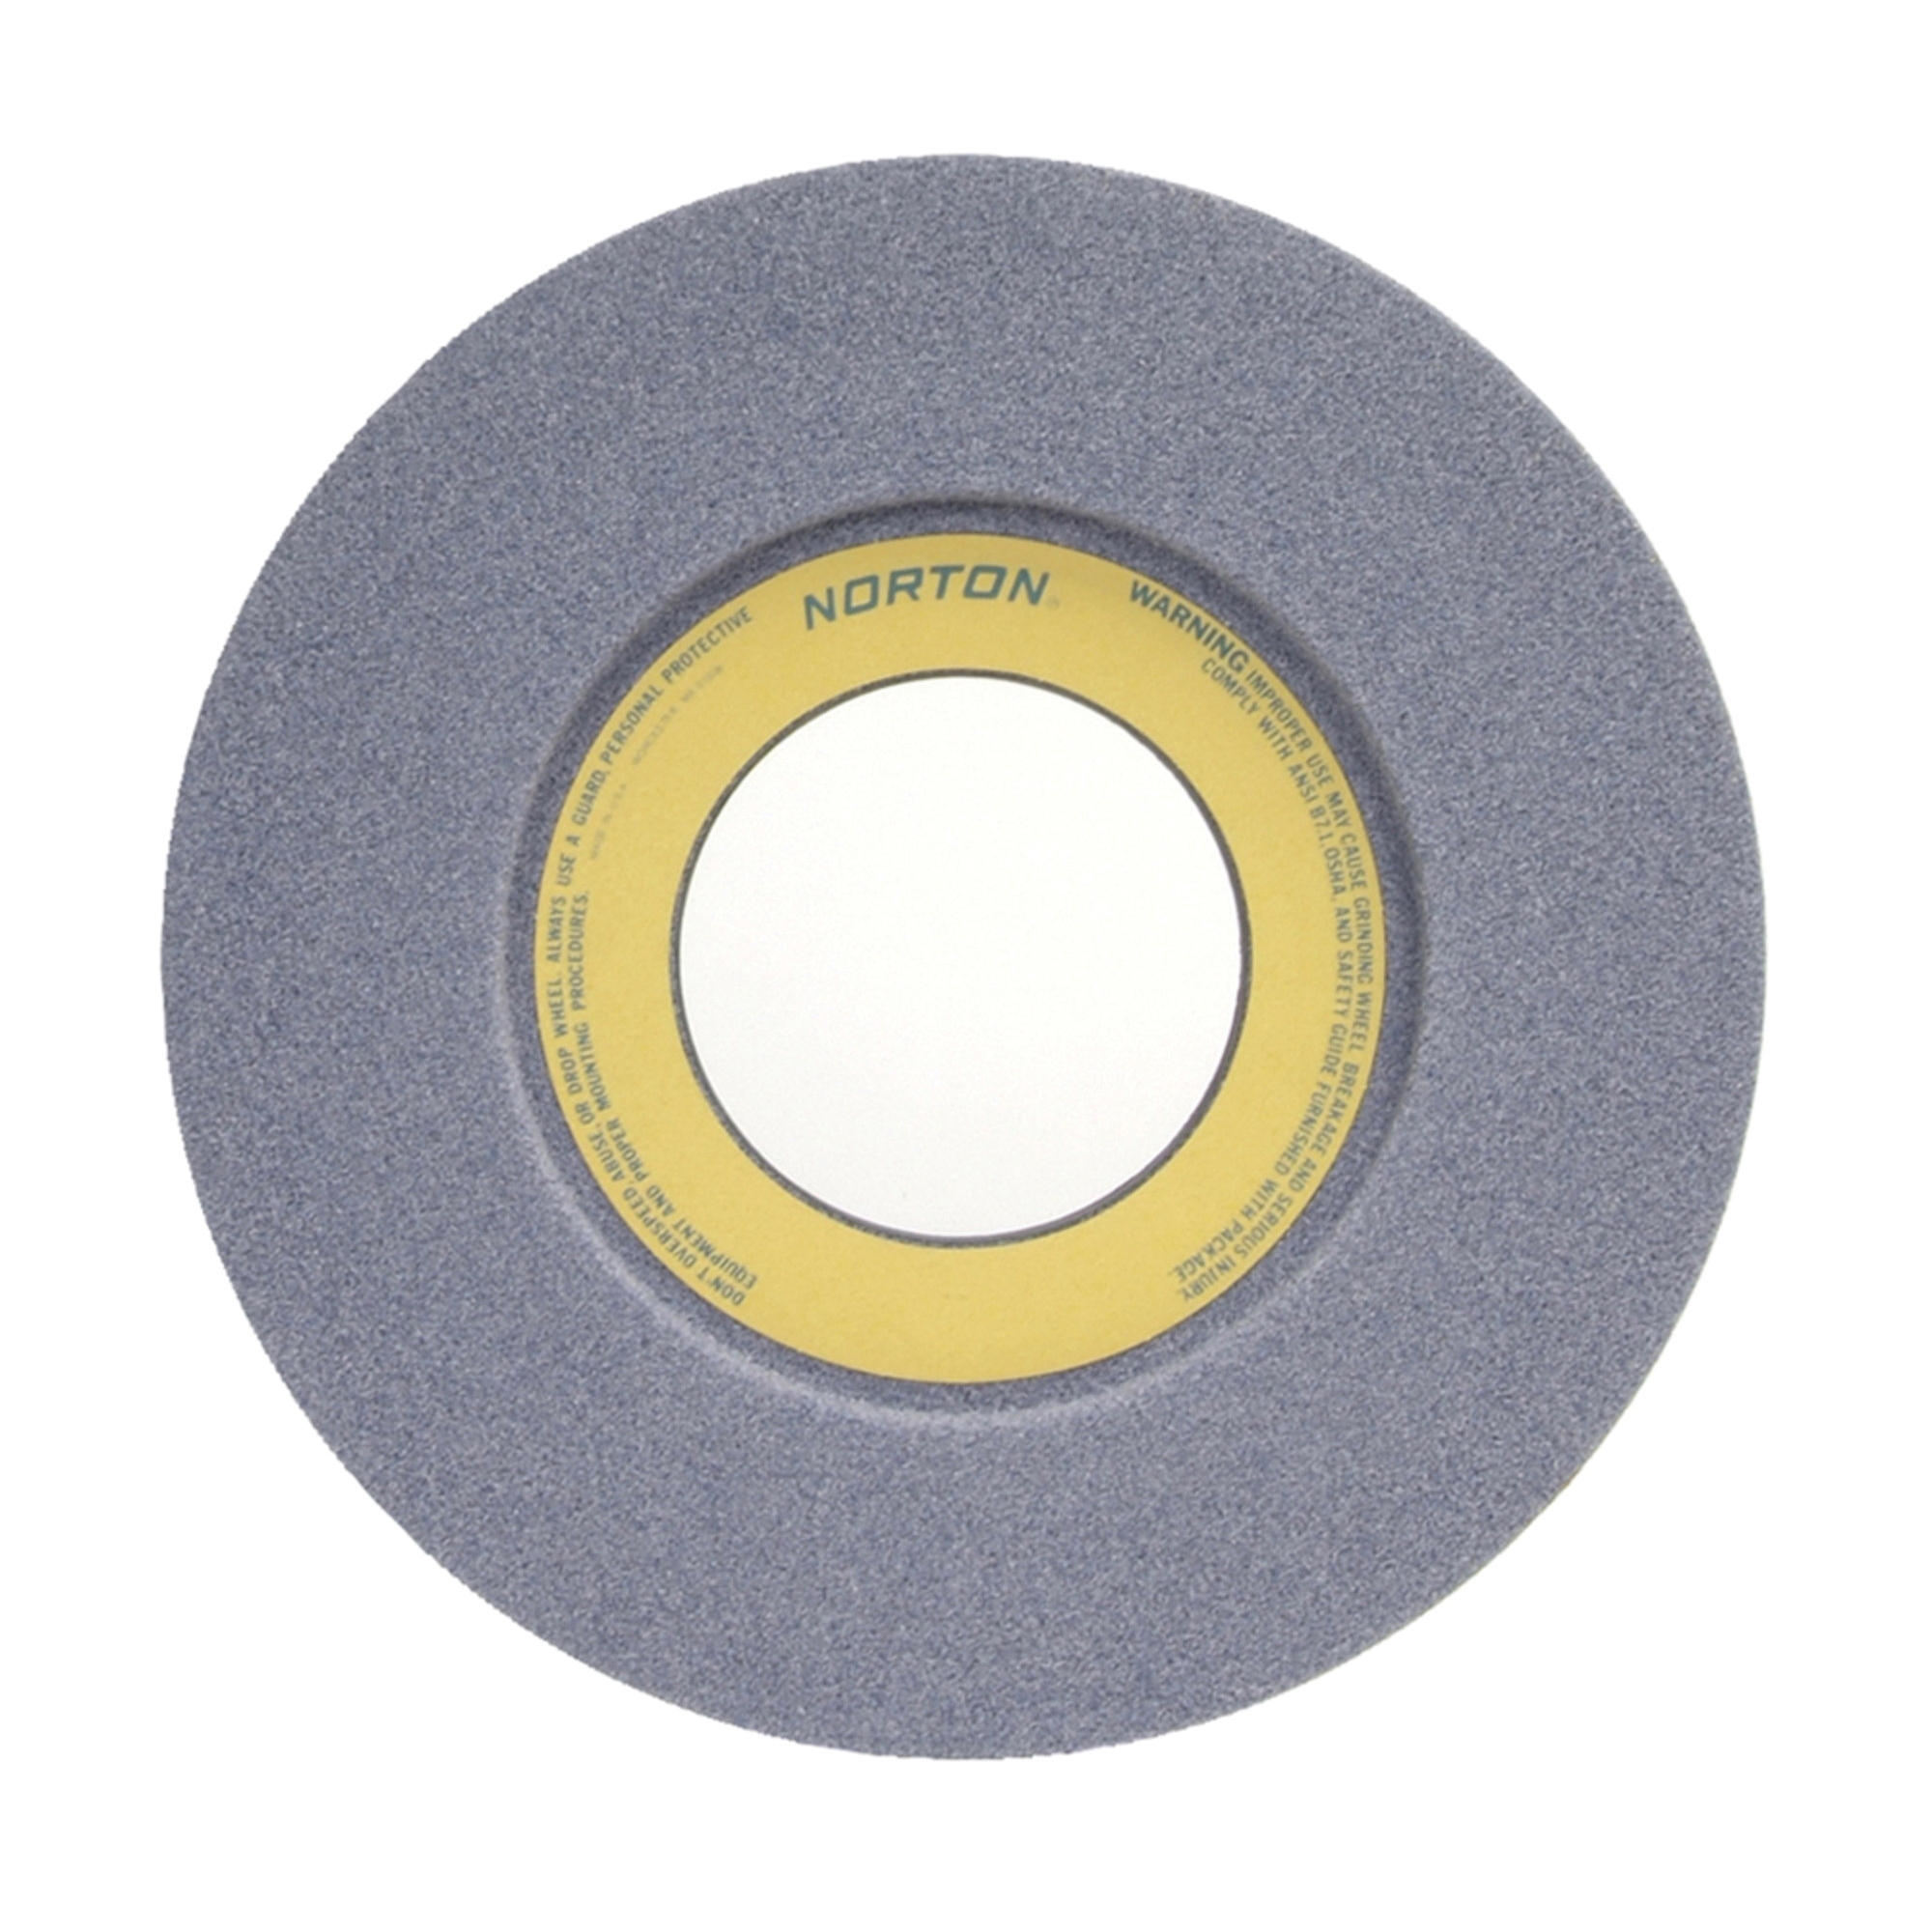 Norton® 66253263169 32A 1-Side Recessed Toolroom Wheel, 12 in Dia x 1-1/2 in THK, 5 in Center Hole, 46 Grit, Aluminum Oxide Abrasive